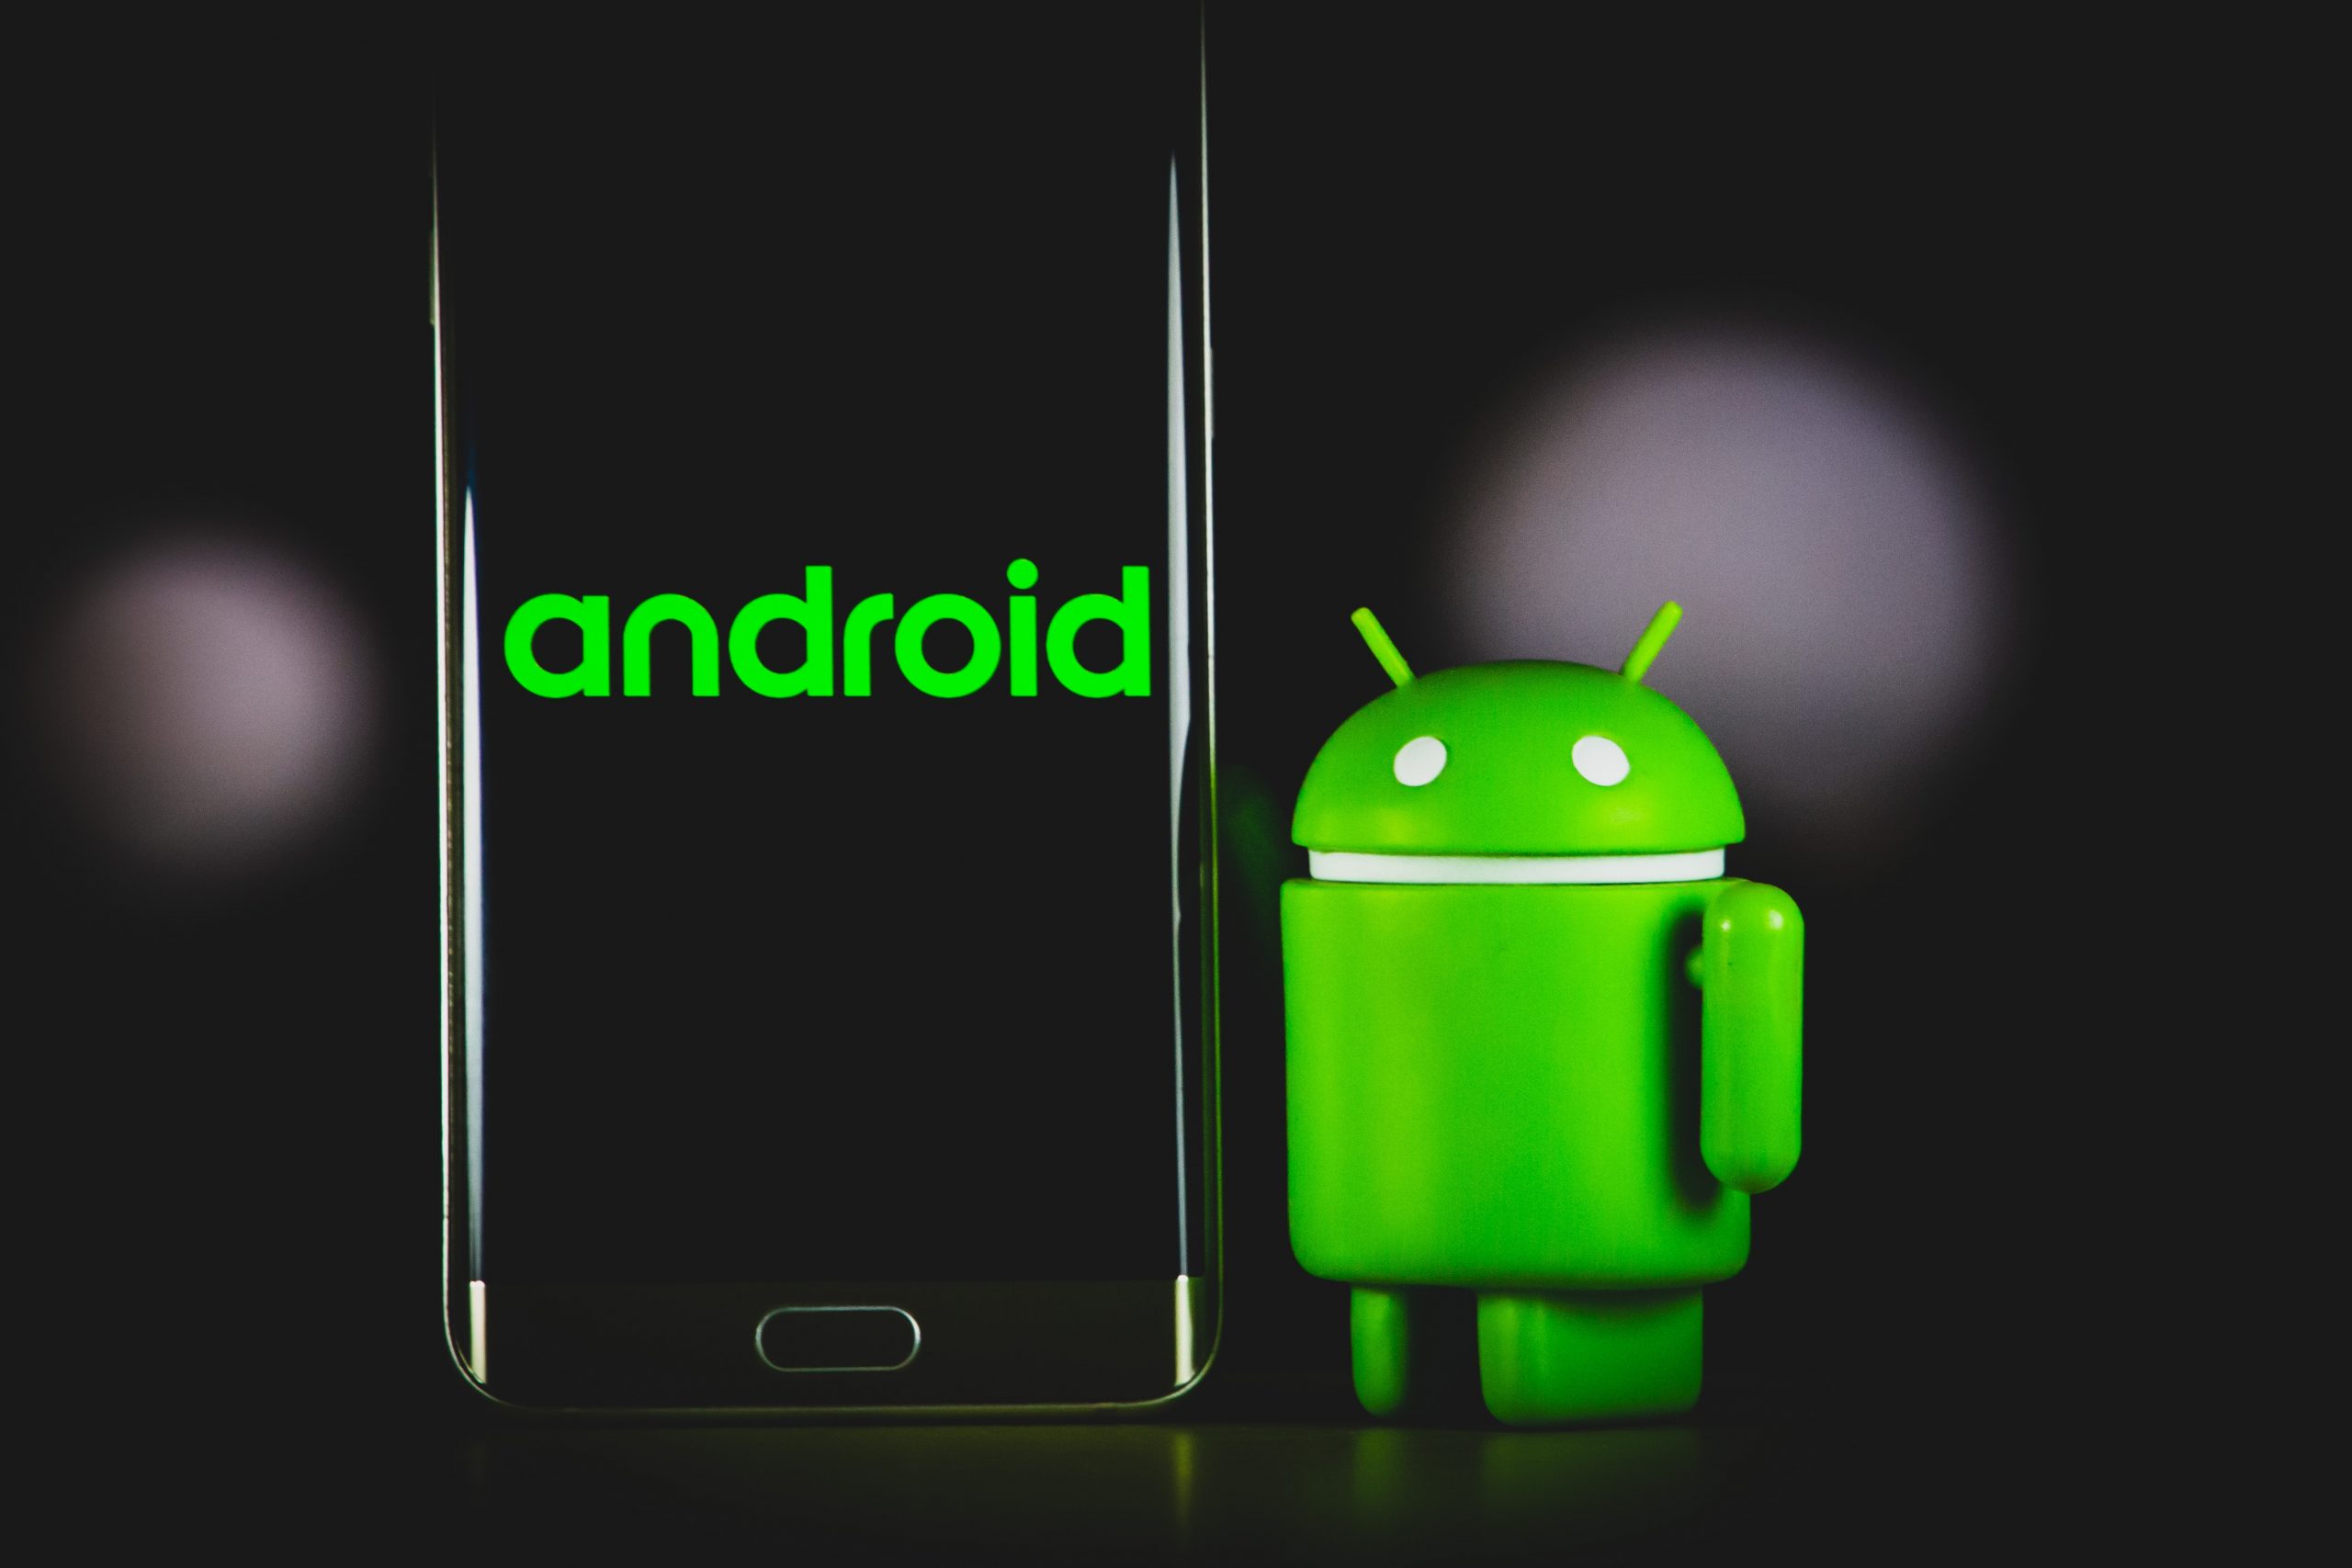 The Android mascot next to an Android phone.